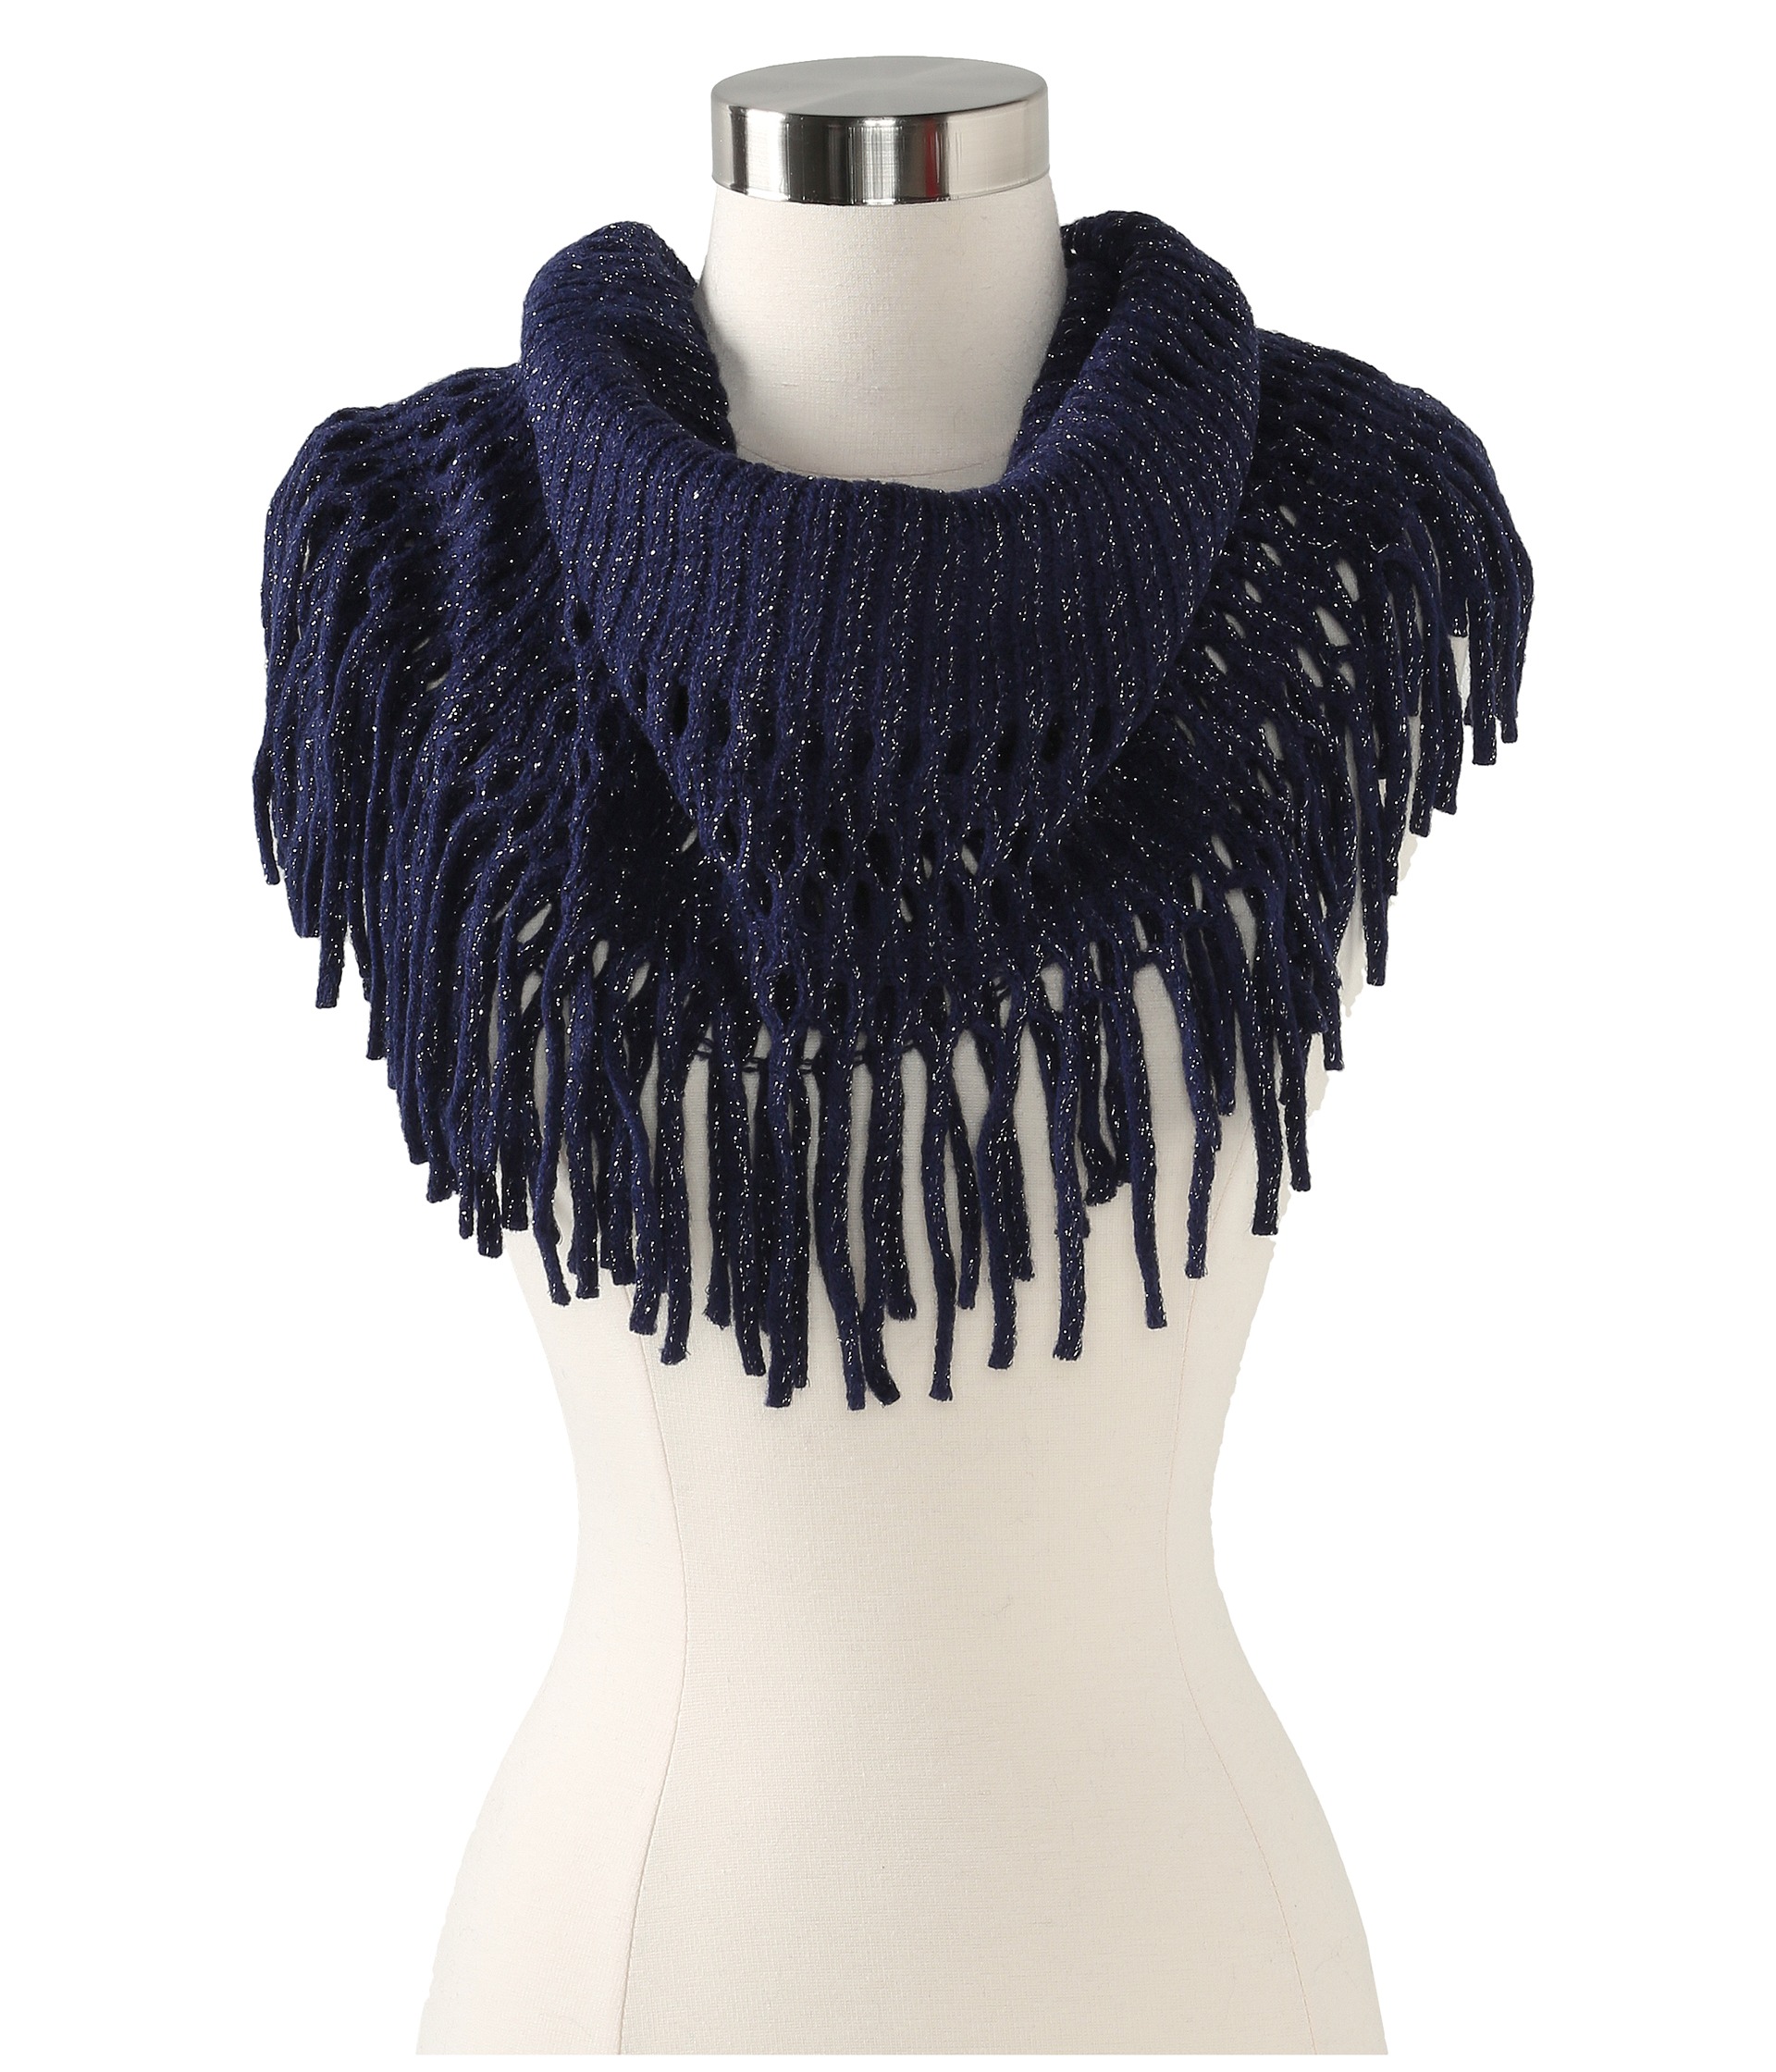 Steve Madden Metallic Open Weave Infinity Scarf | Shipped Free at ...